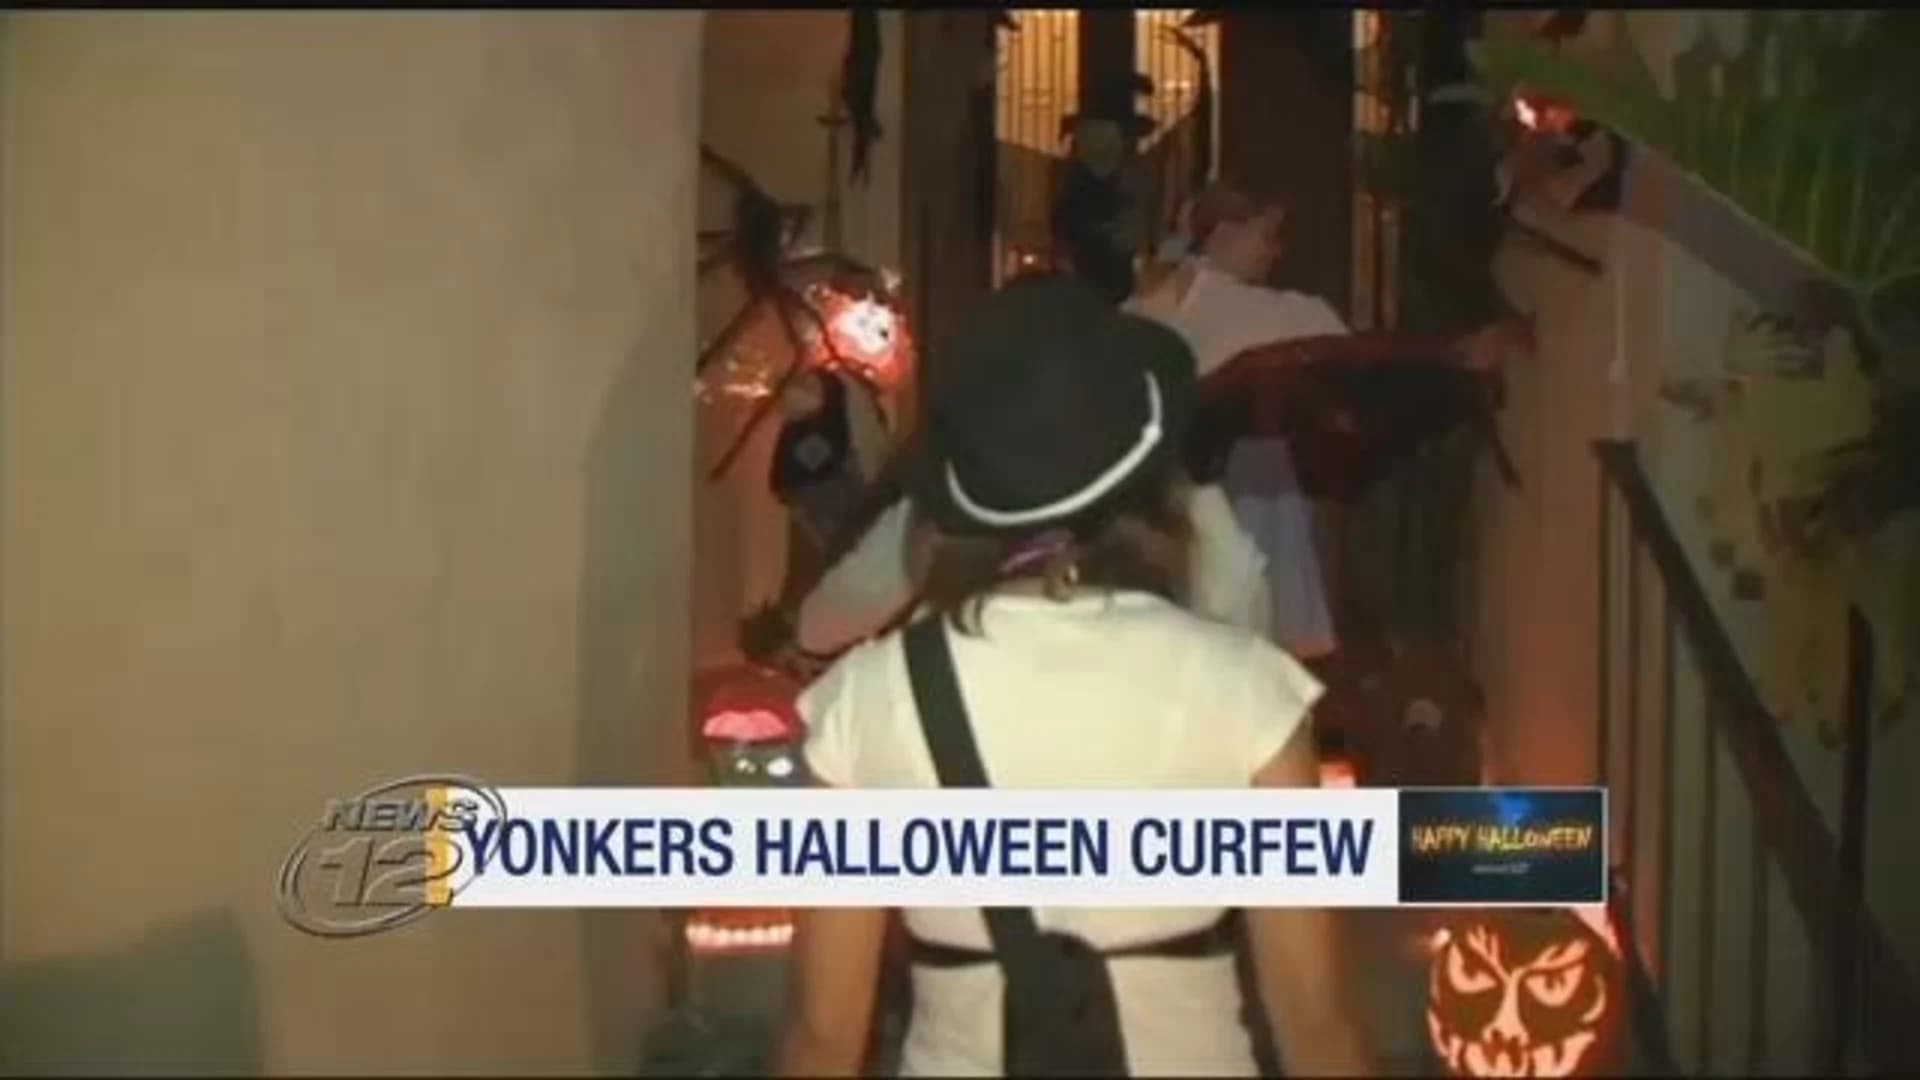 Cities put curfews into place for Halloween tonight